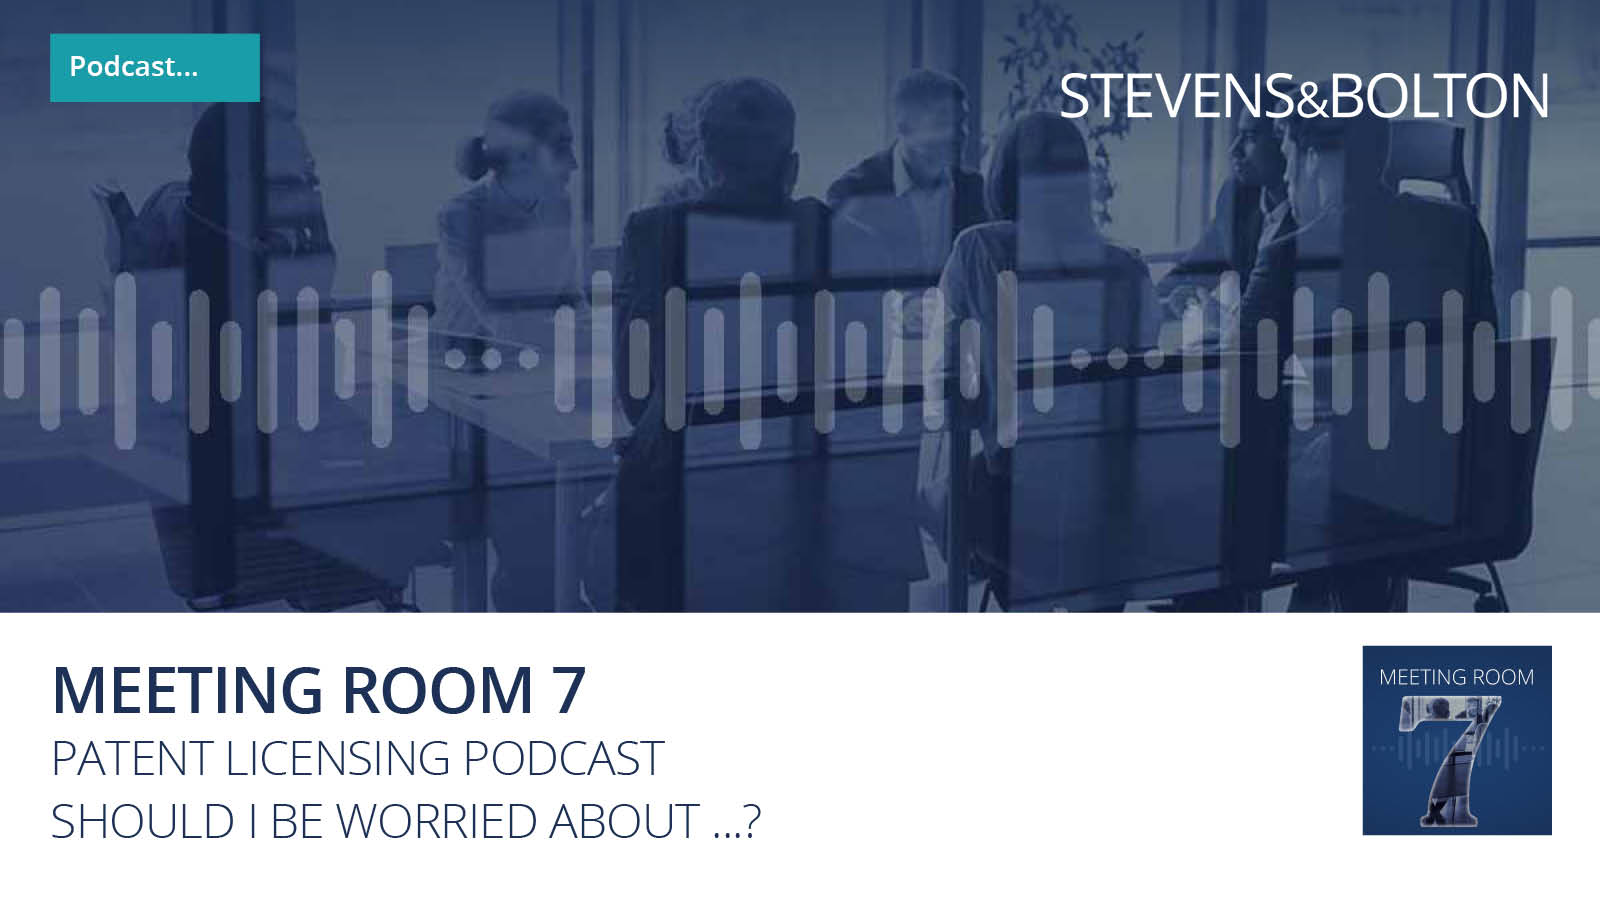  Meeting Room 7 - The patent licensing podcast - Should I be worried about...?